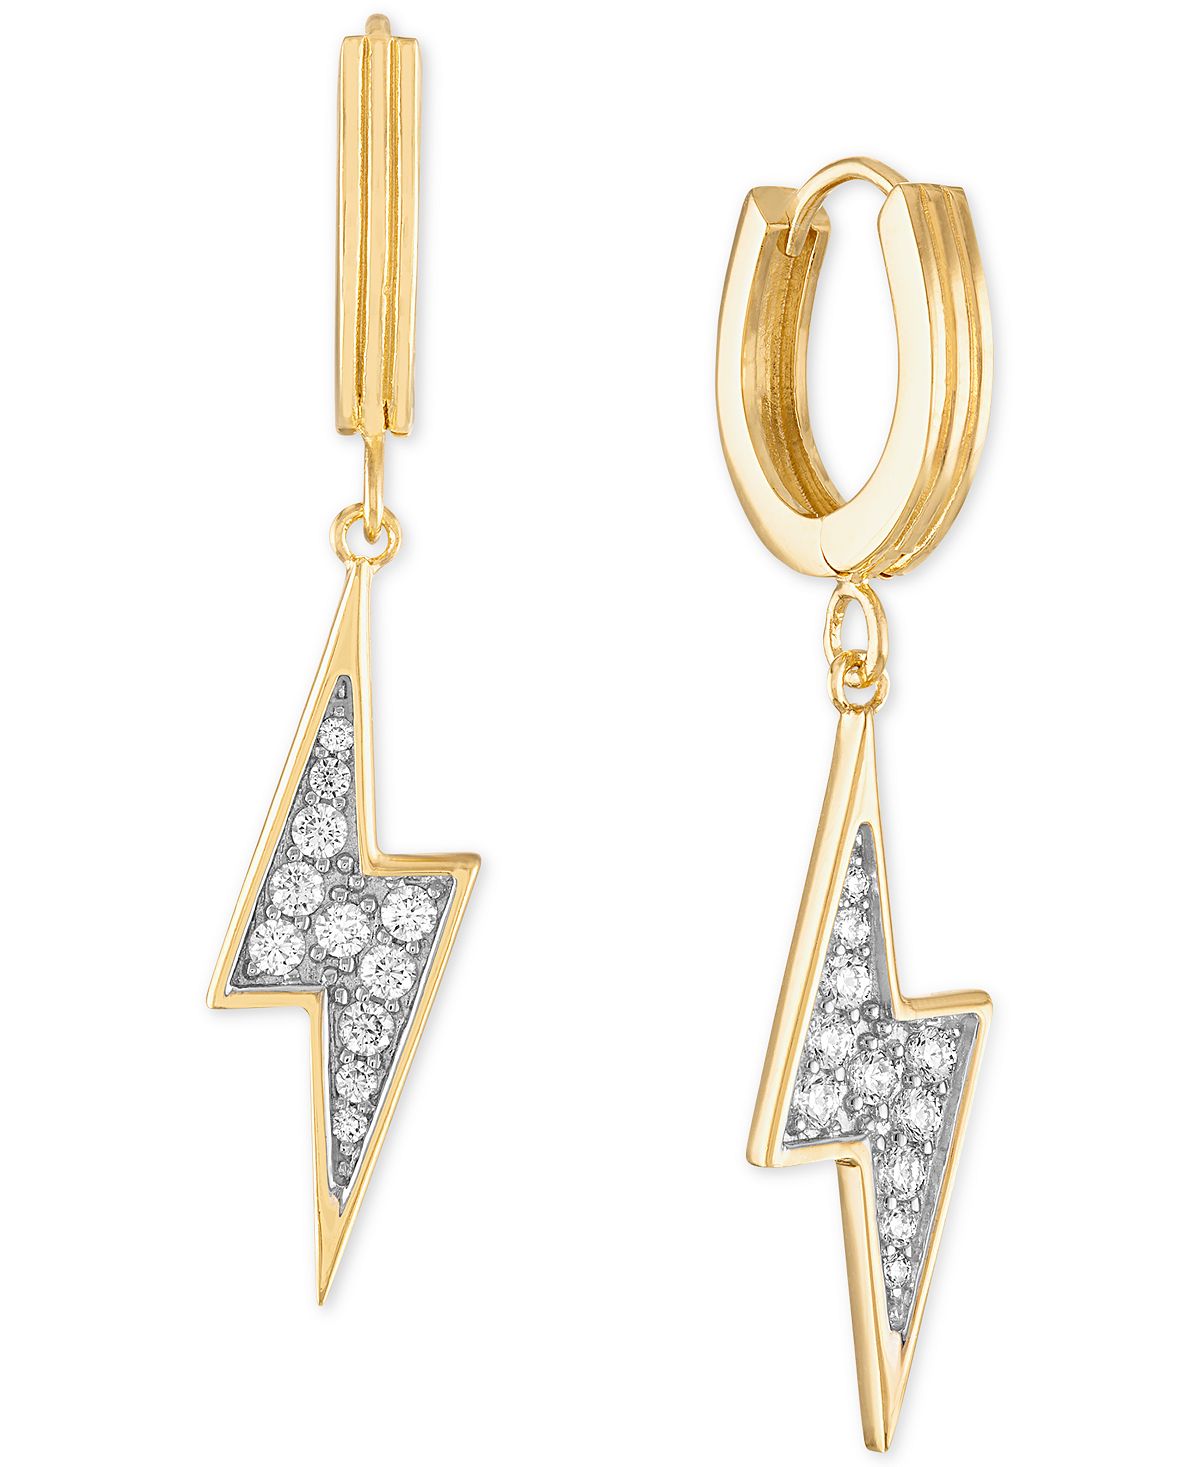 Esquire Men's Jewelry - Cubic Zirconia Lightning Bolt Drop Earrings in 14k Gold-Plated Sterling Silver